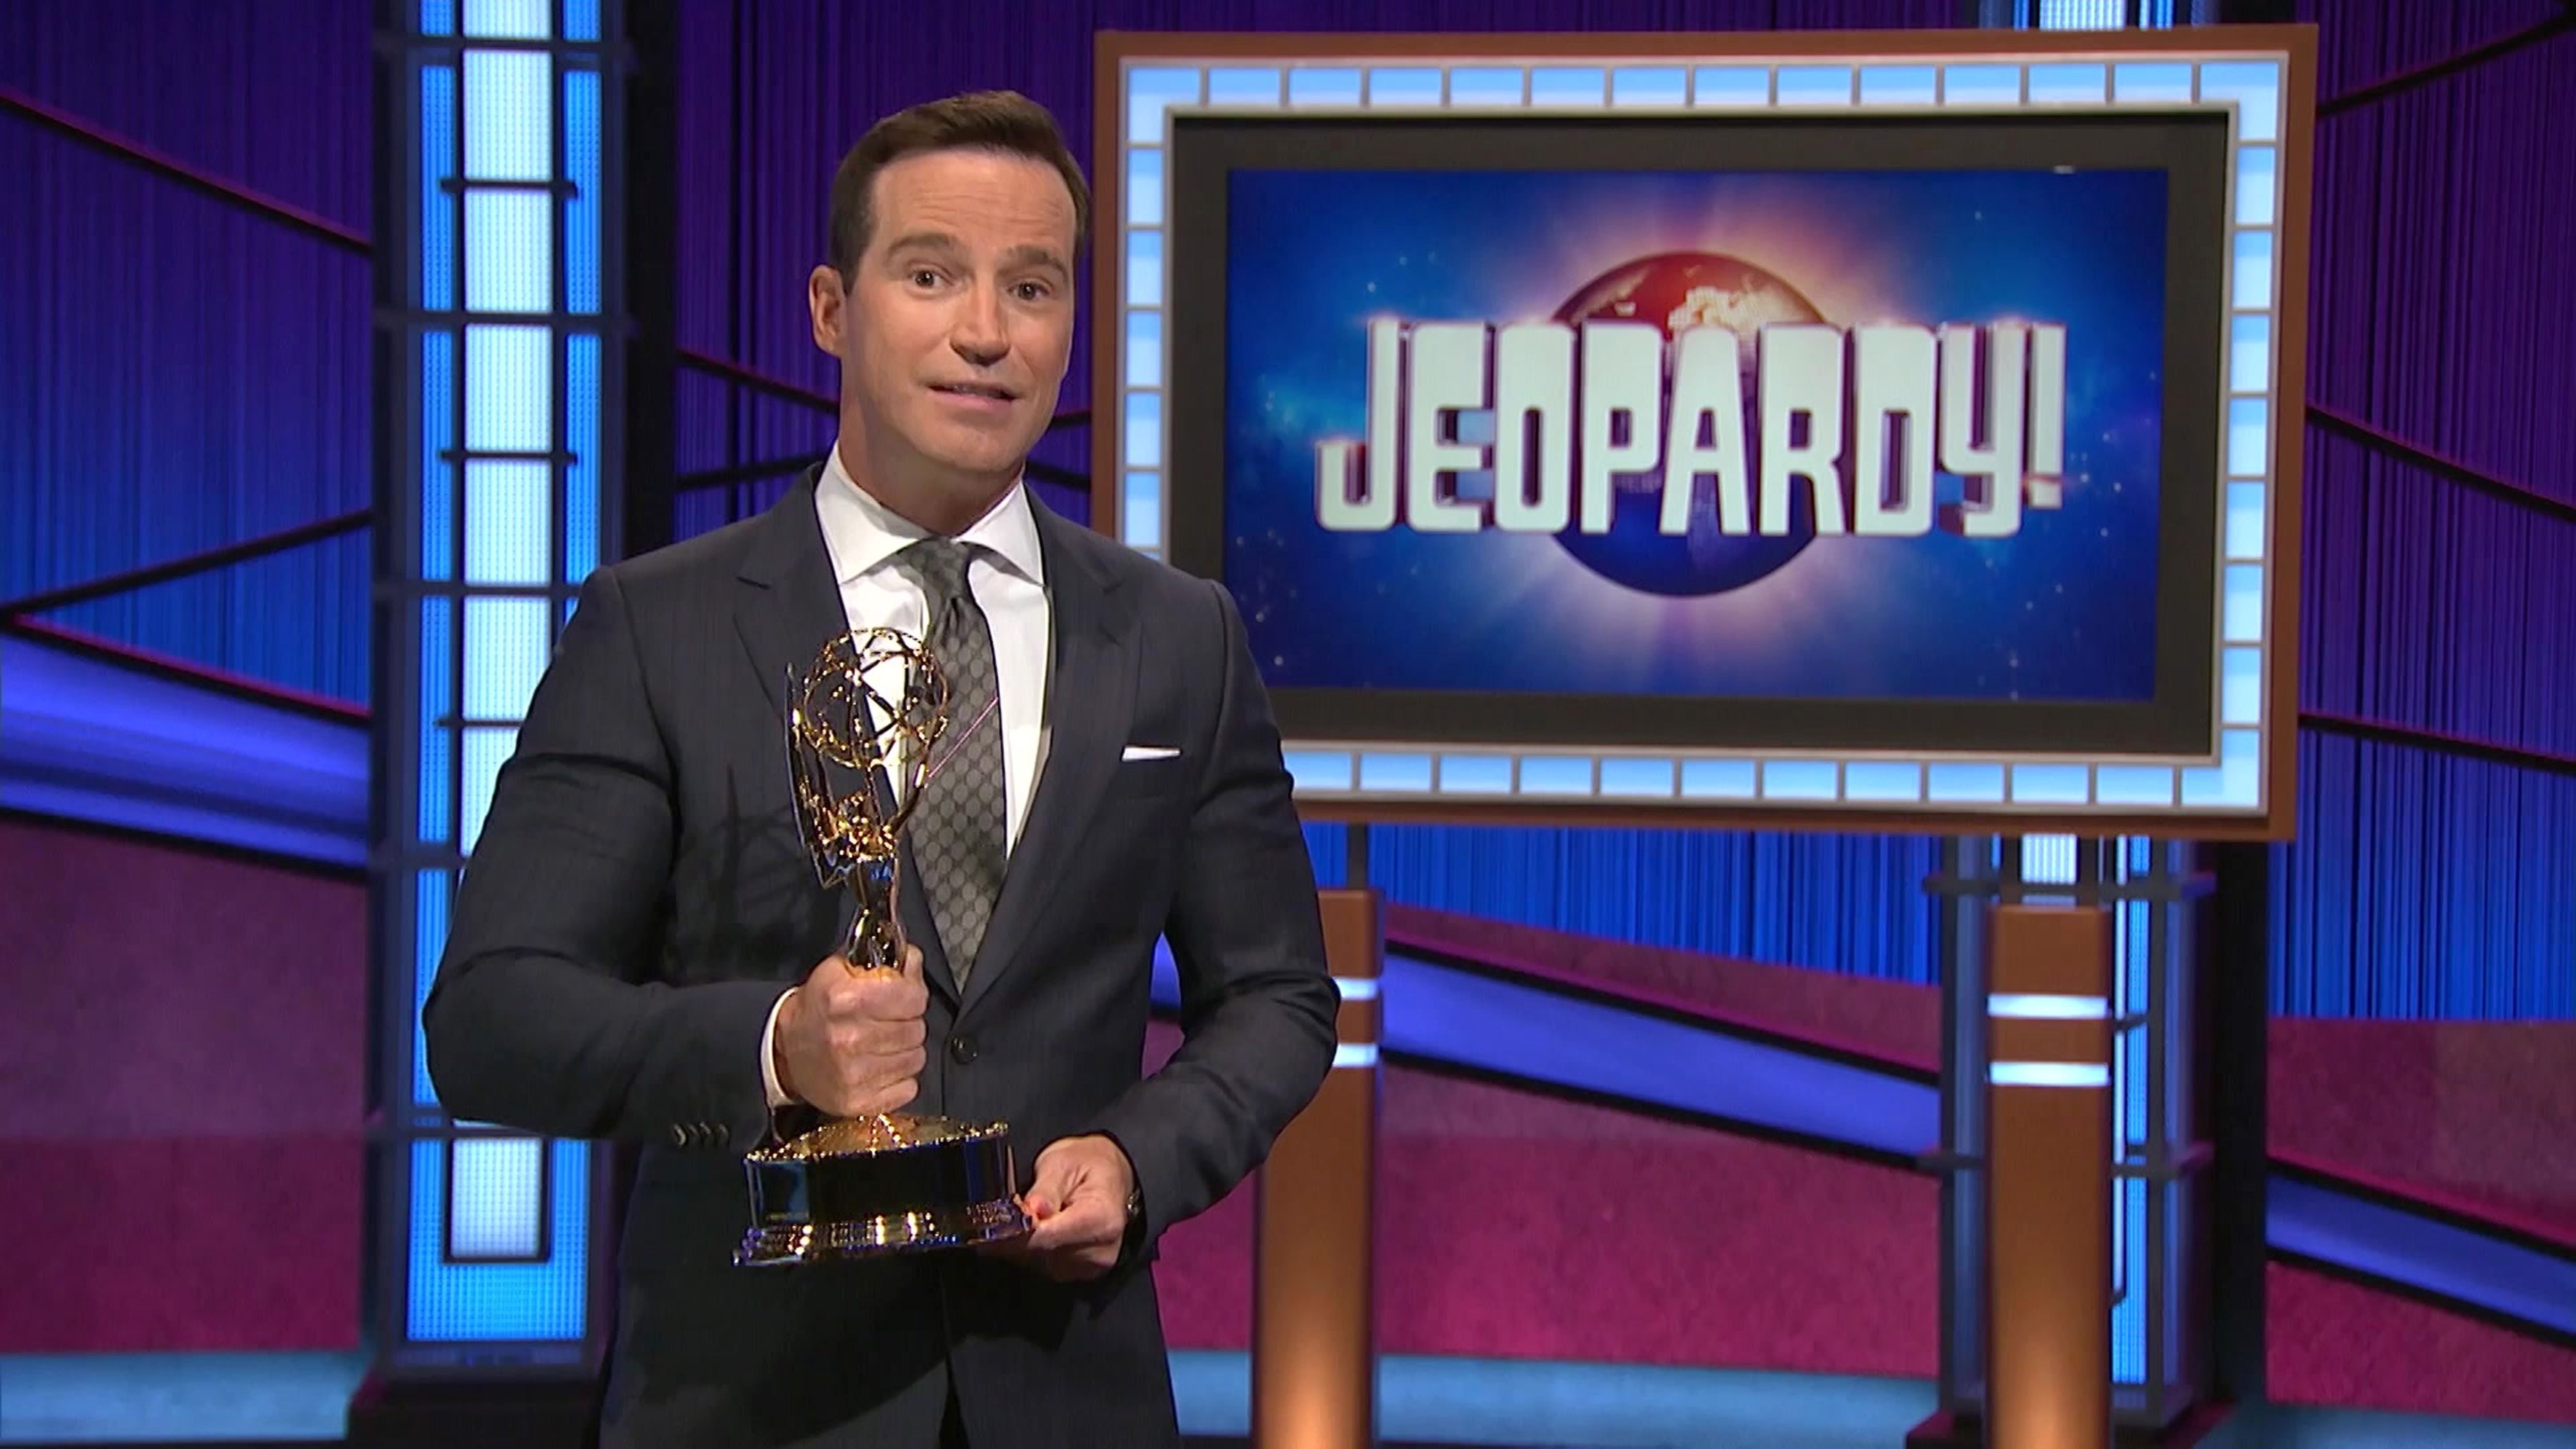 Jeopardy!' and Mike Richards: How it all went wrong